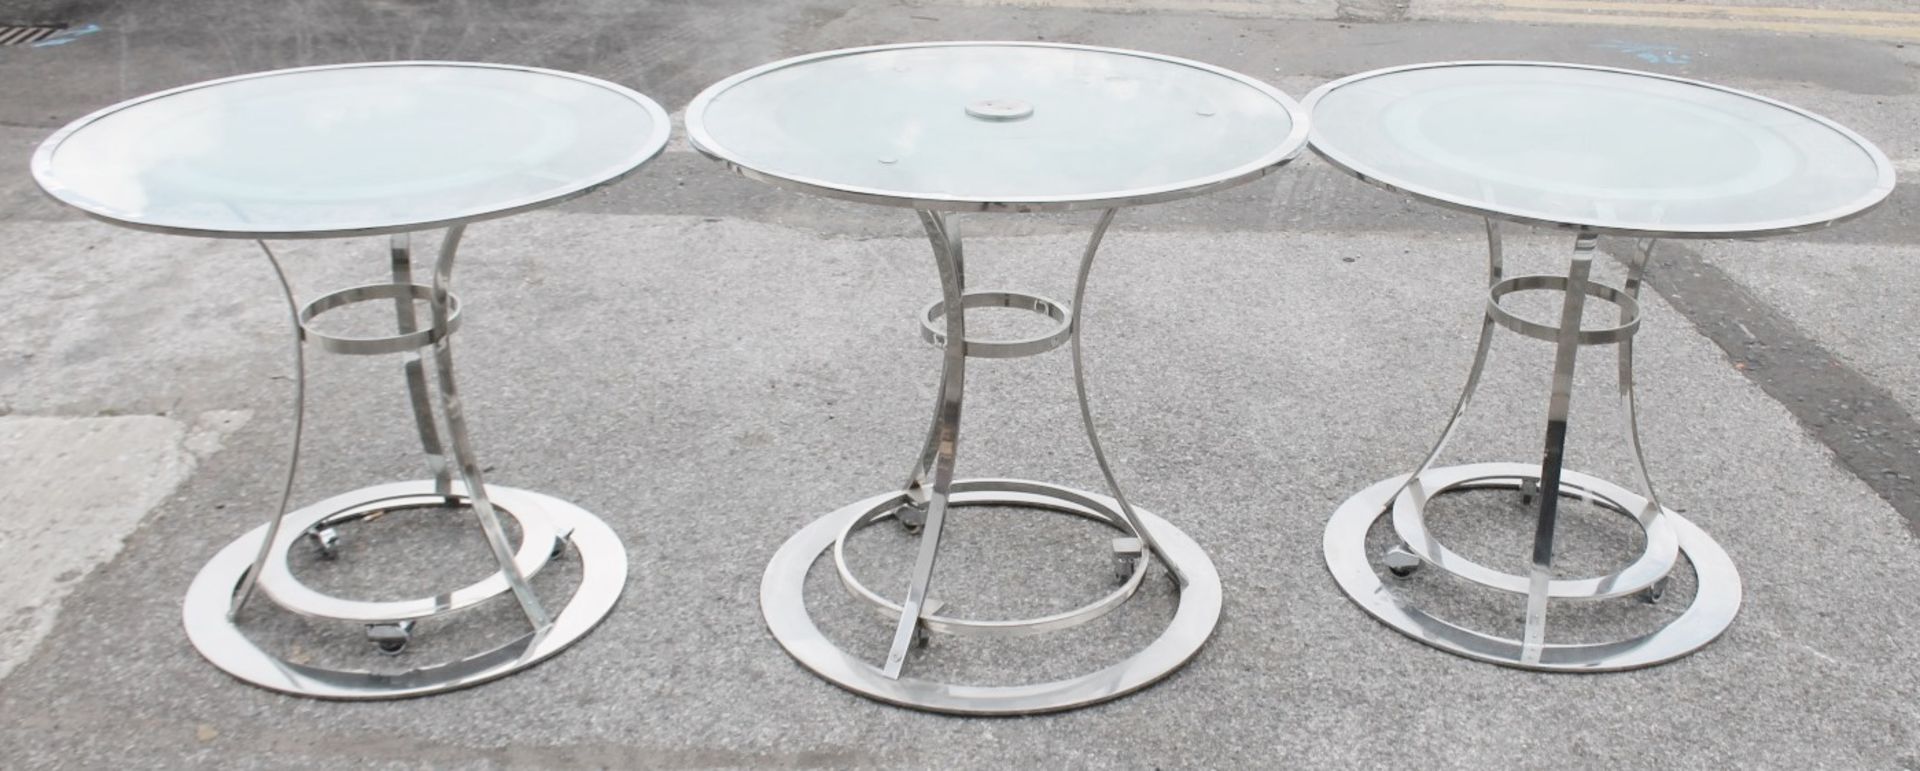 3 x Designer Tables In Glass And Chrome - Ex-Display Showroom Pieces - Ref: HAR254 GIT - CL987 -